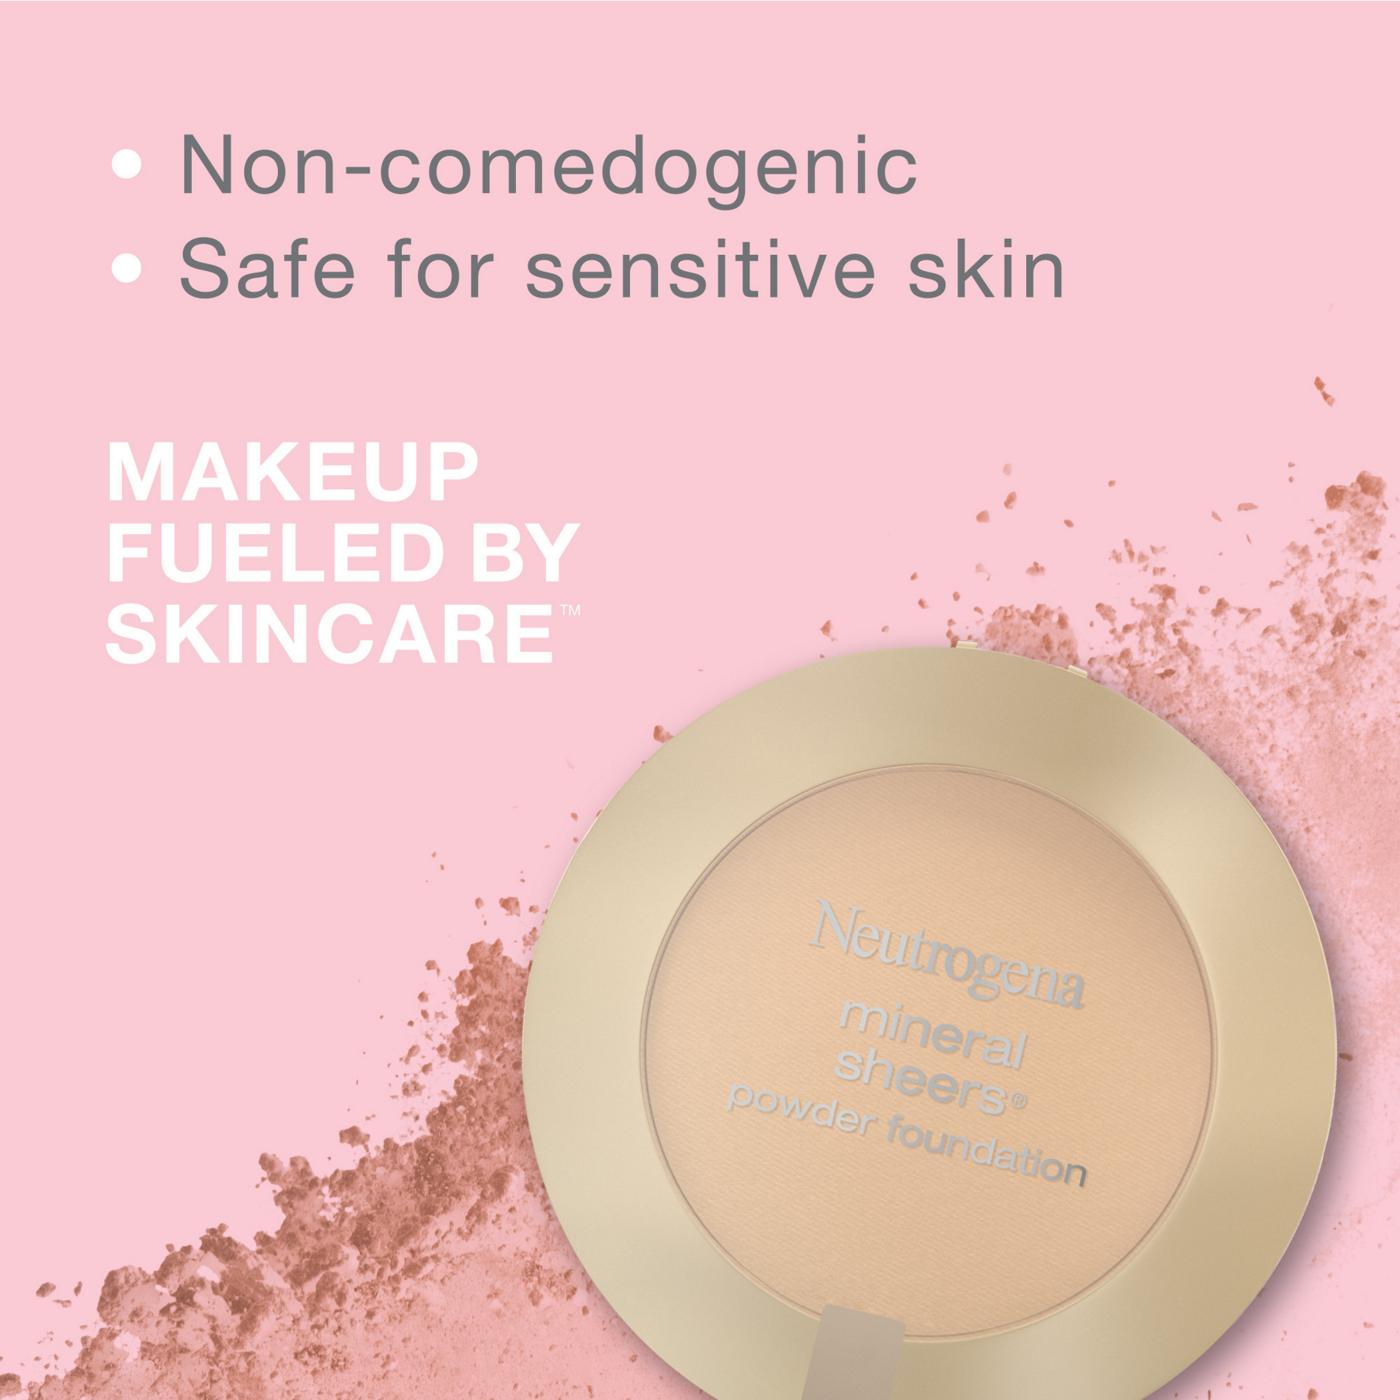 Neutrogena Mineral Sheers 40 Nude Compact Powder Foundation; image 2 of 6